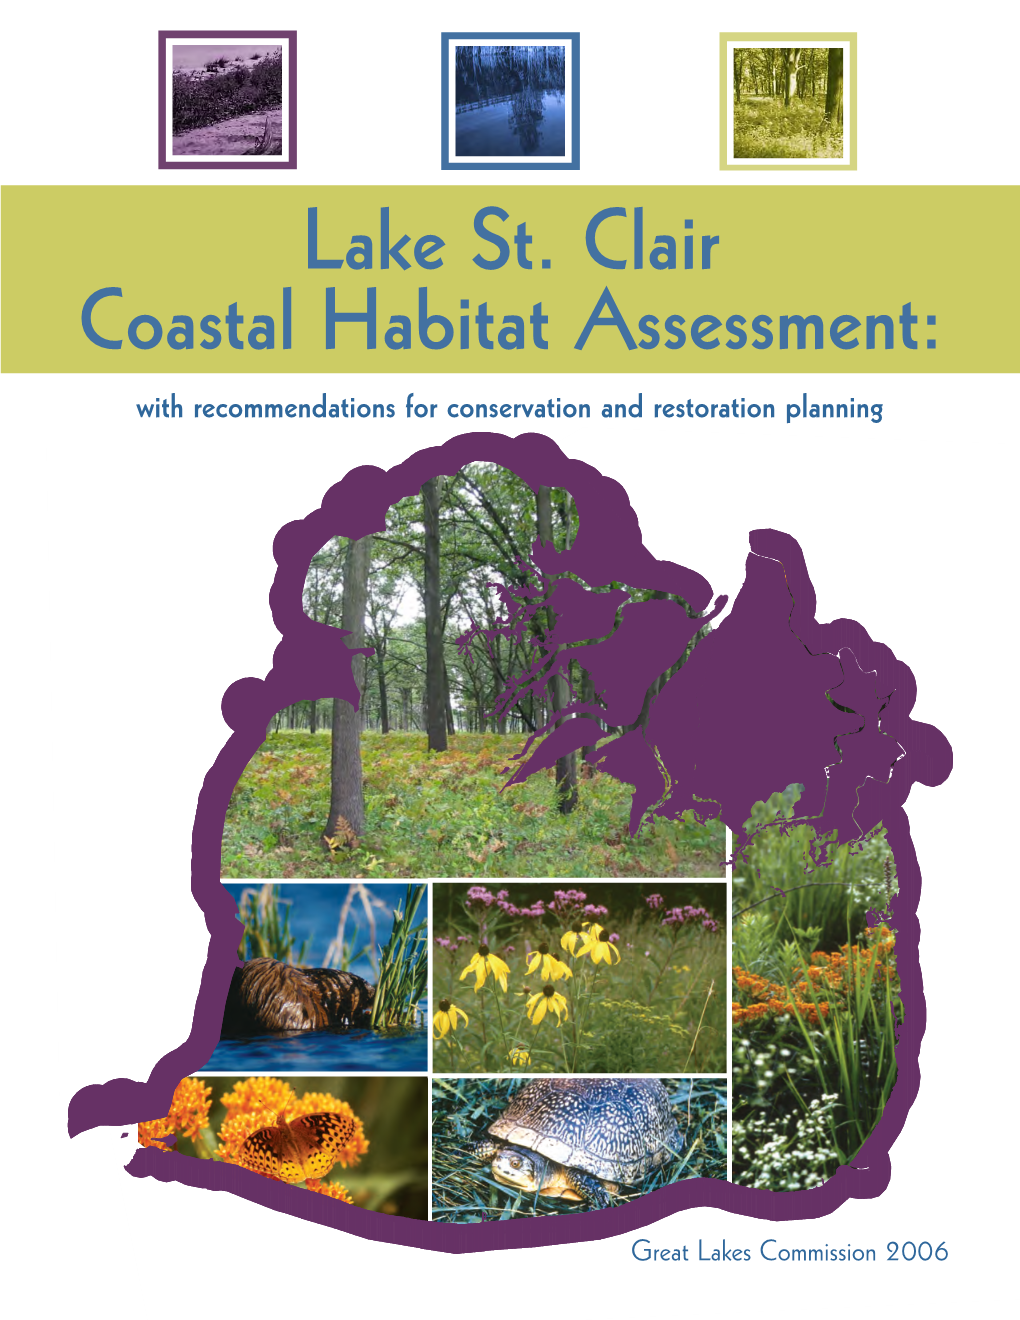 Lake St. Clair Coastal Habitat Assessment: with Recommendations for Conservation and Restoration Planning